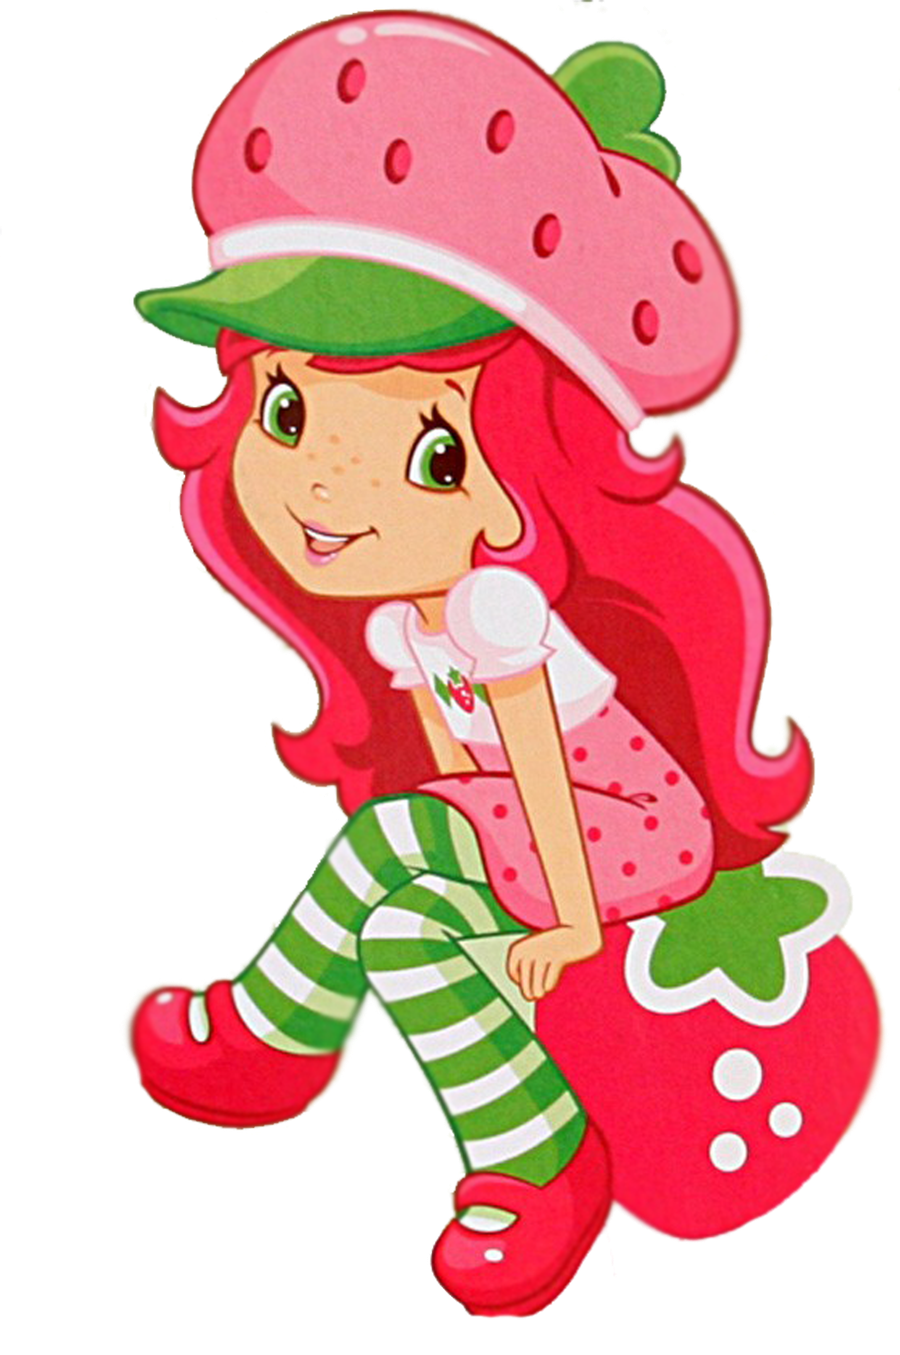 doll clipart strawberry